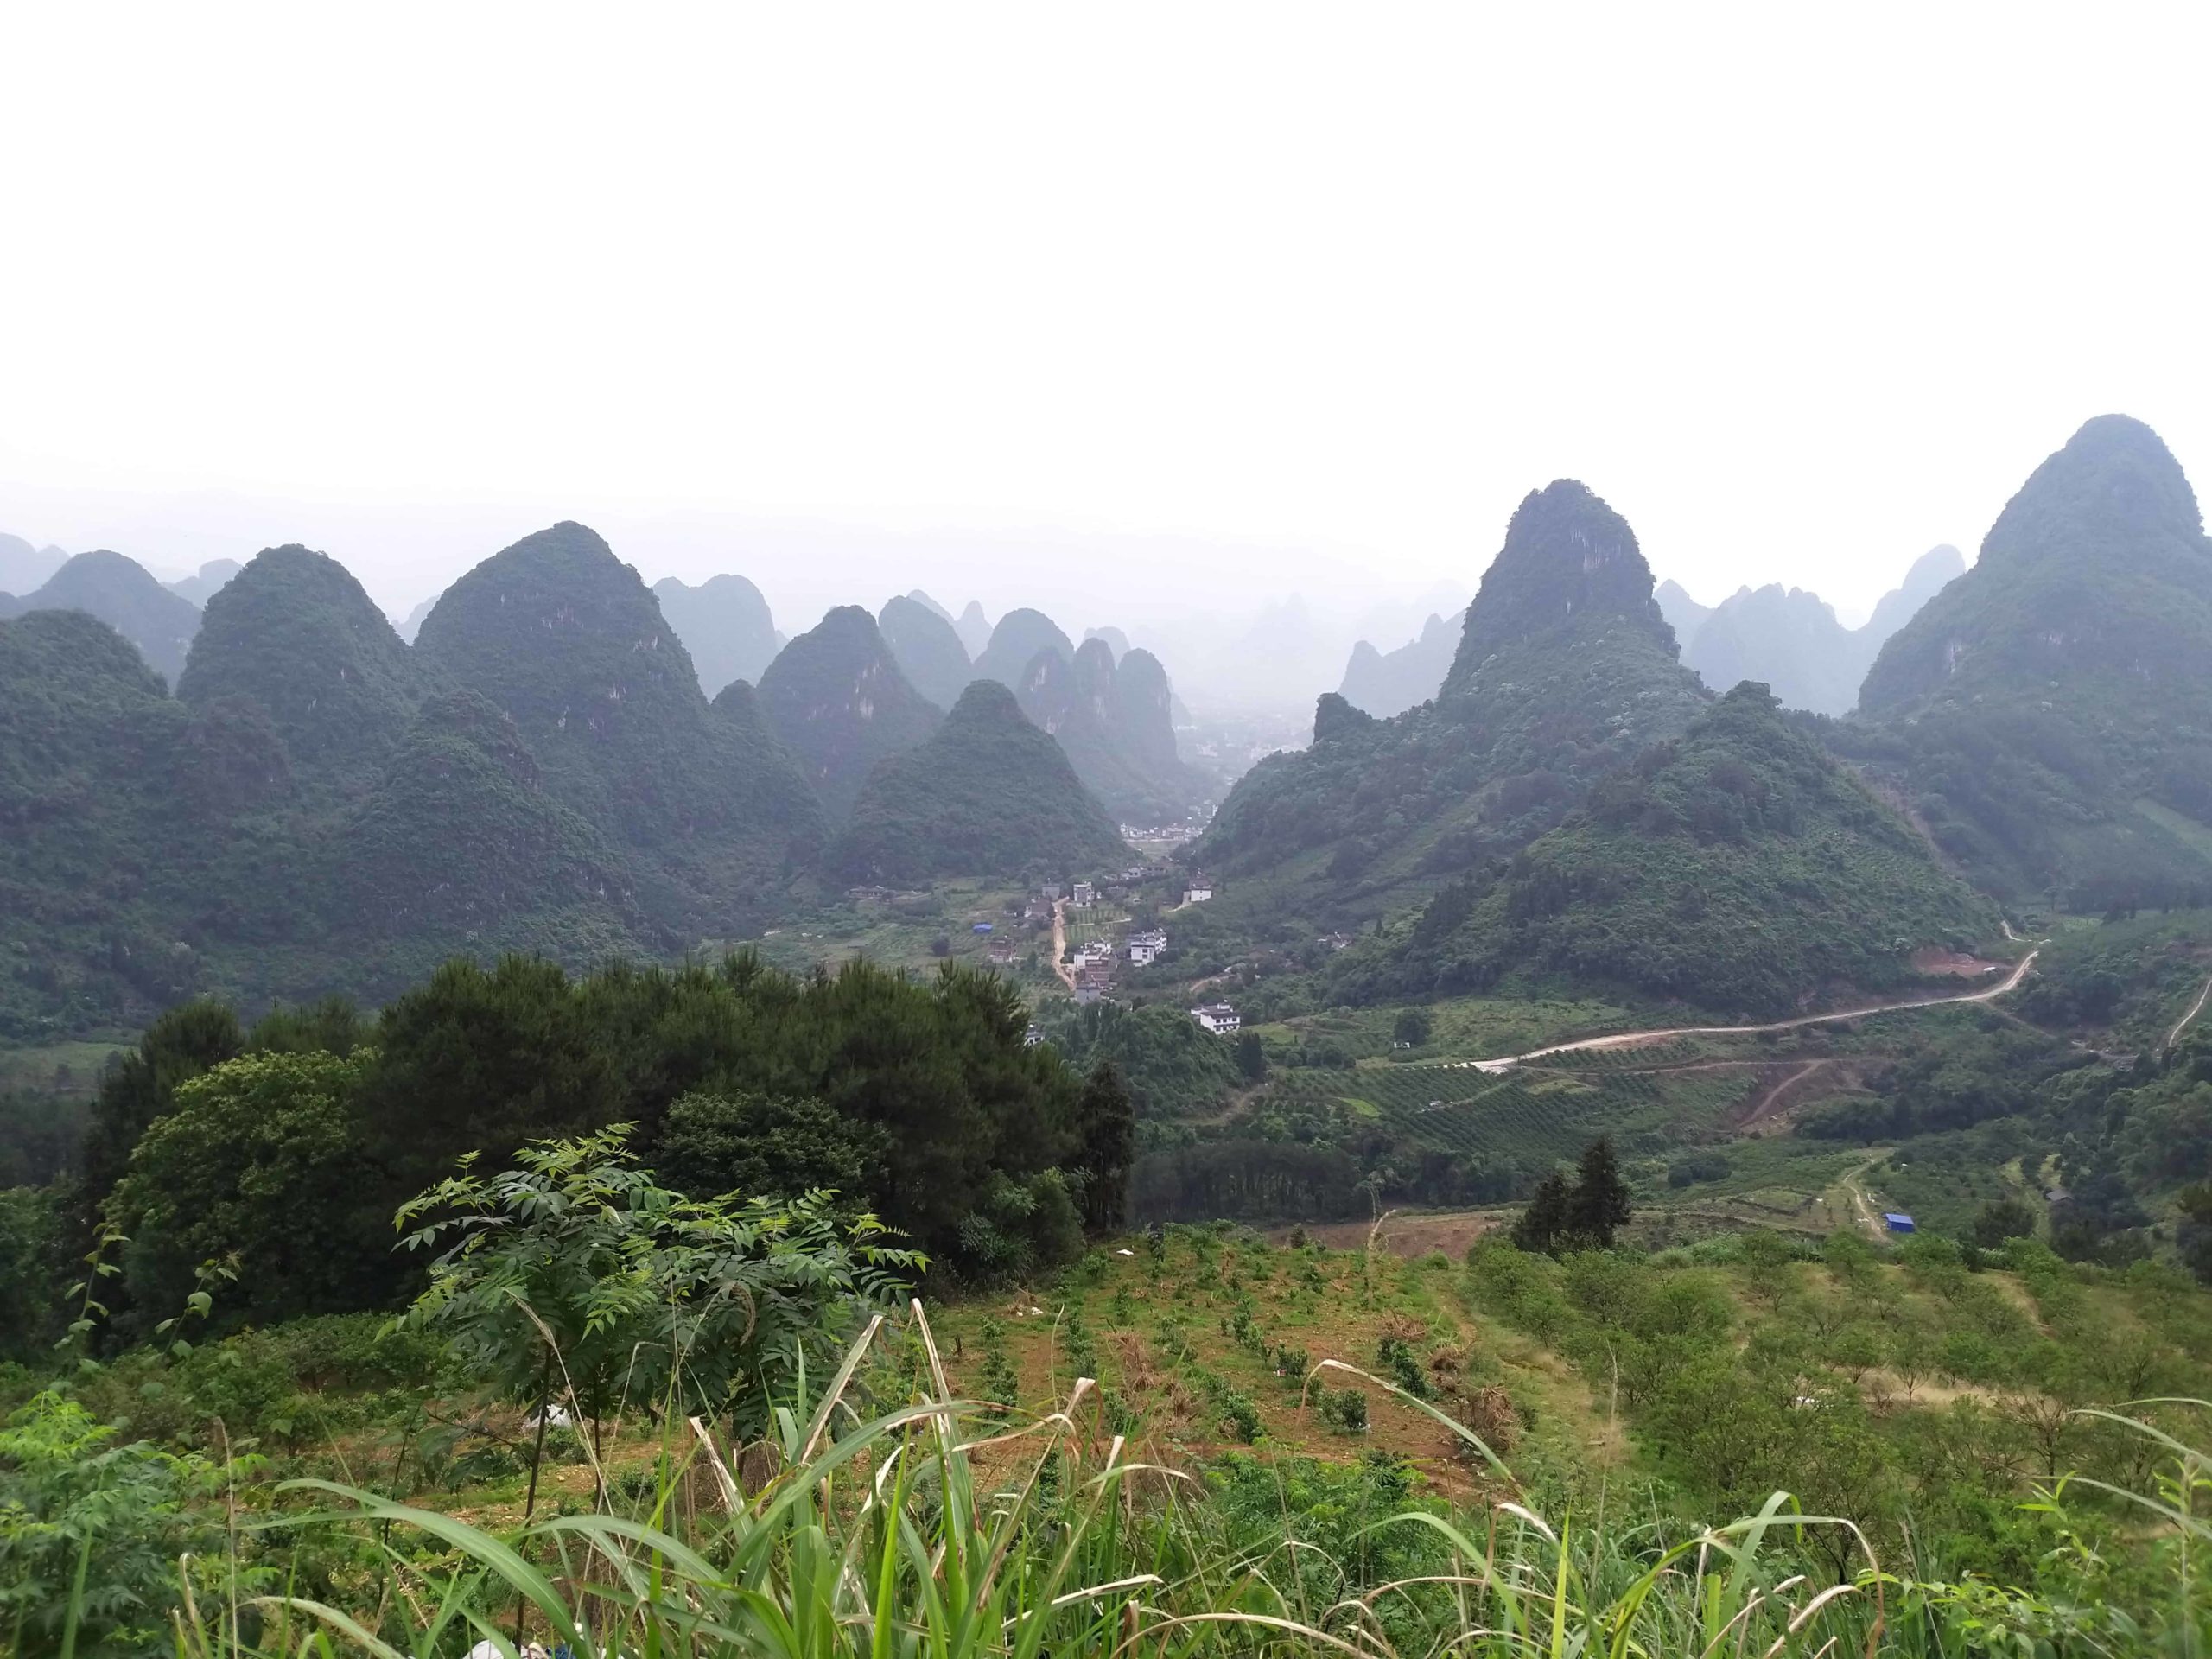 Karst mountains between Guilin and Yangshuo